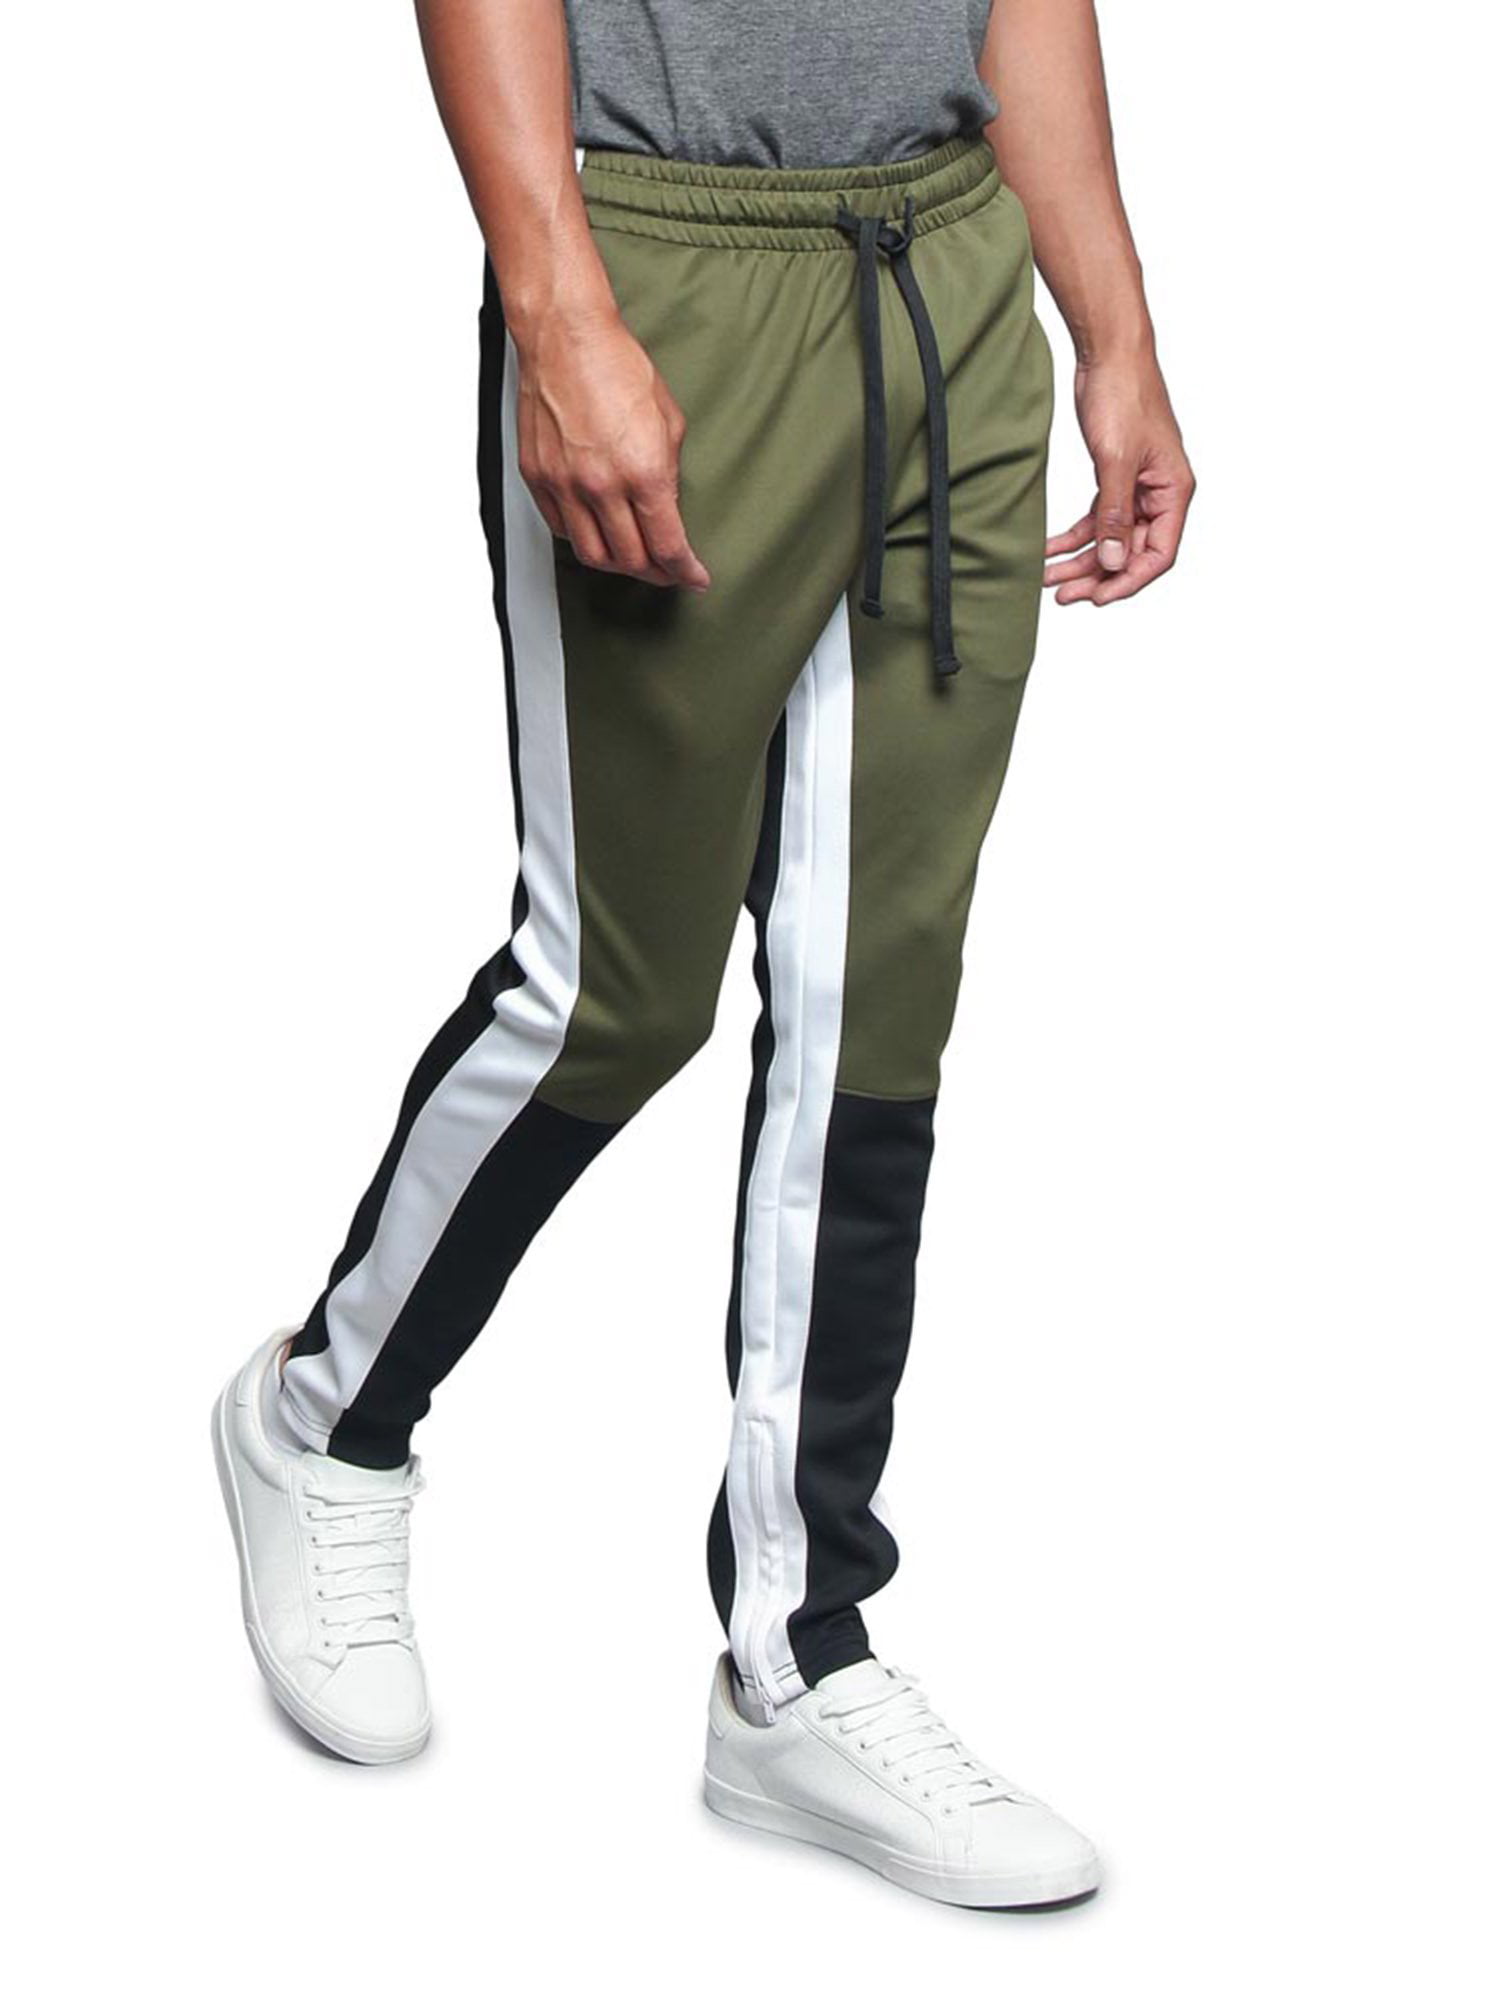 G-Style USA Men's Hip Hop Slim Fit Track Pants - Athletic Jogger with Side  Stripe - Black/Red - 2X-Large 